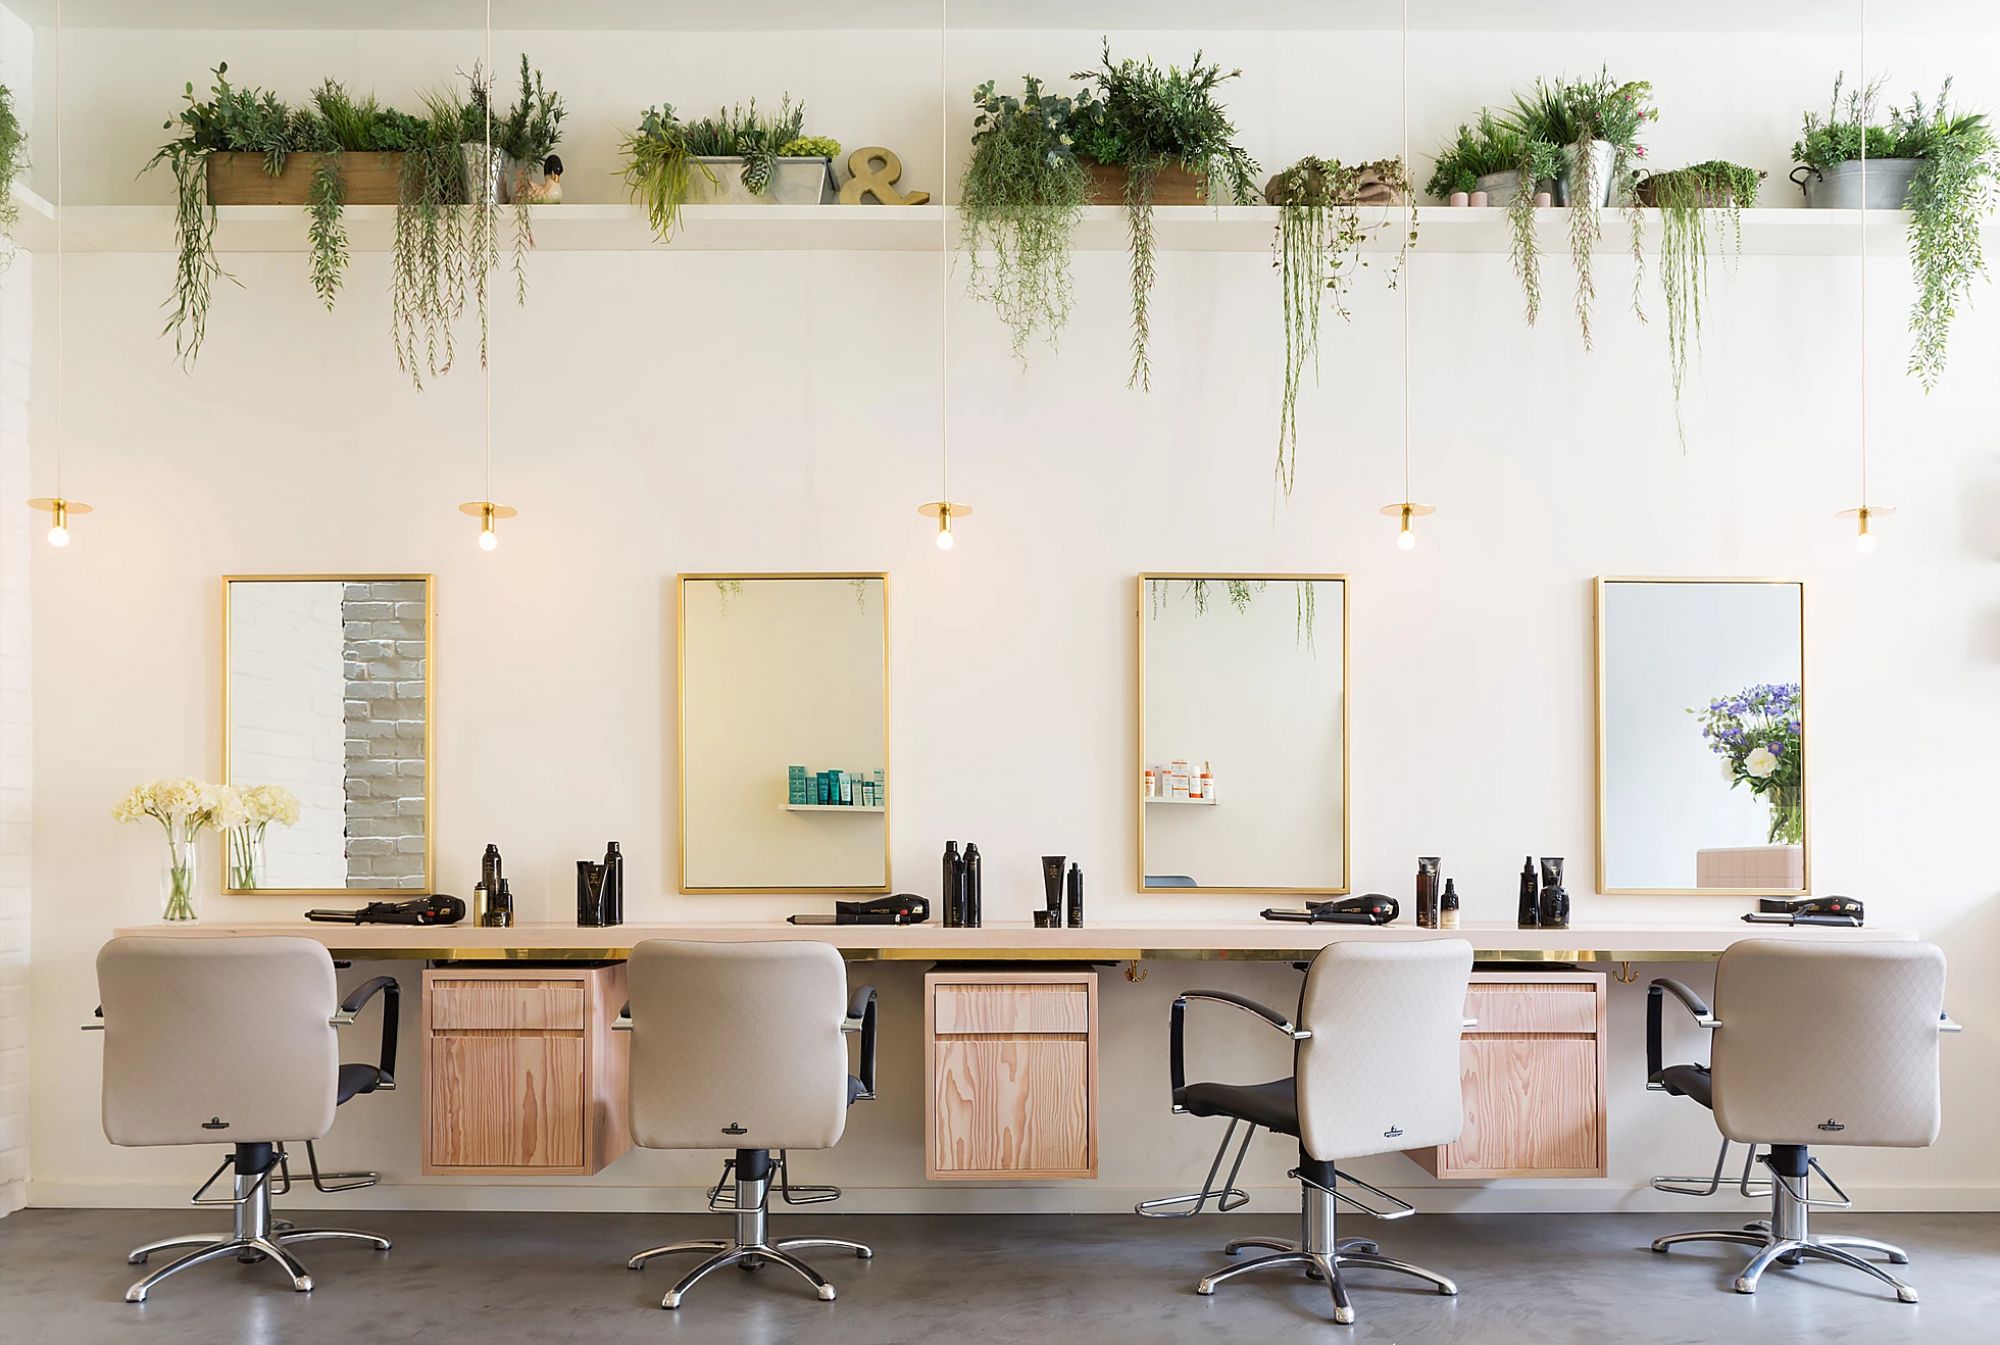 Frank and Faber – Aer Blowdry Bar, Kensington, A new type of Salon